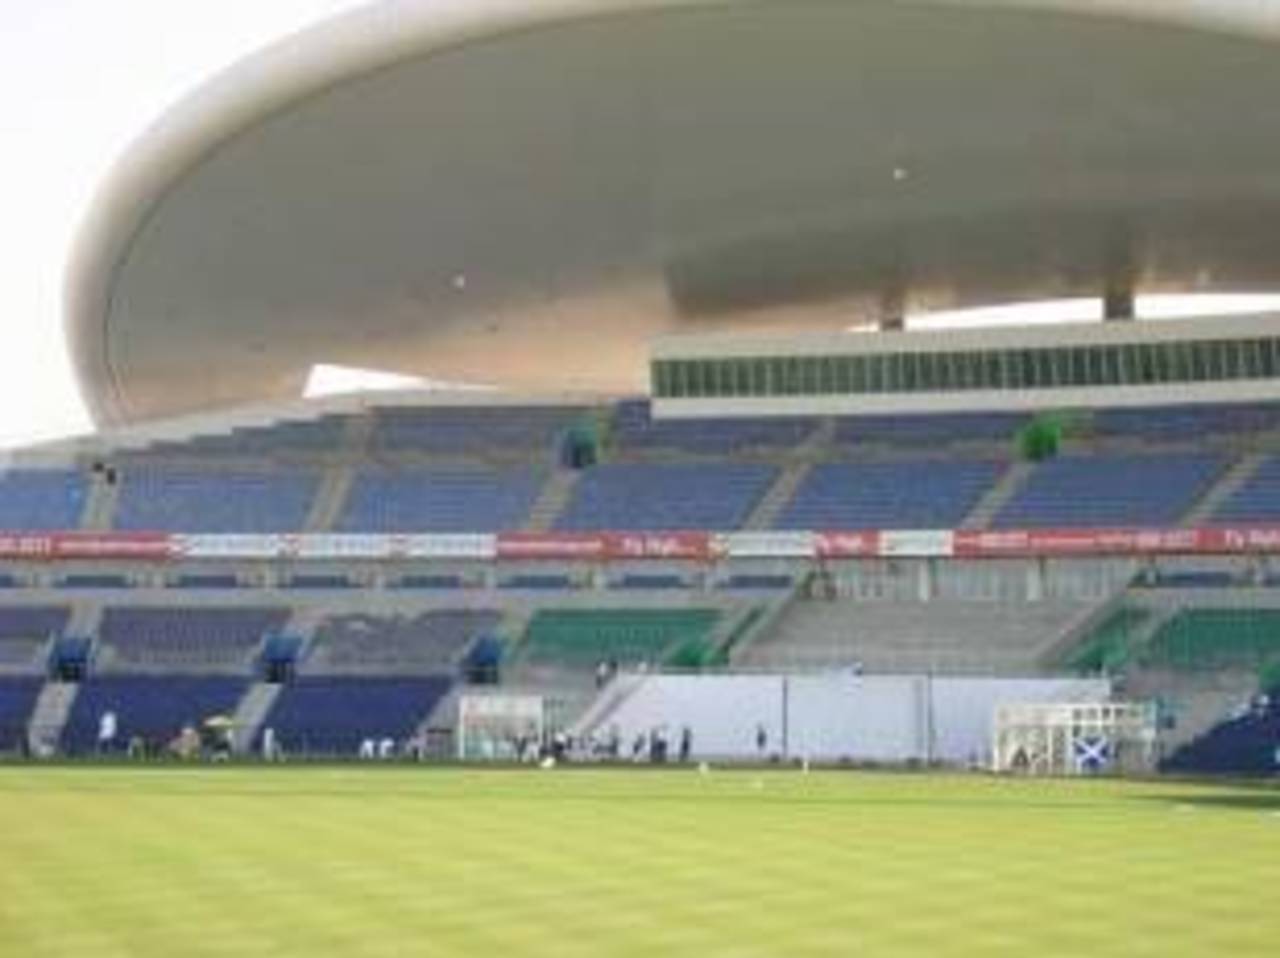 A general view of the Sheikh Zayed stadium in Abu Dhabi during the ICC Intercontinental Cup match between Kenya and Scotland, November 2004